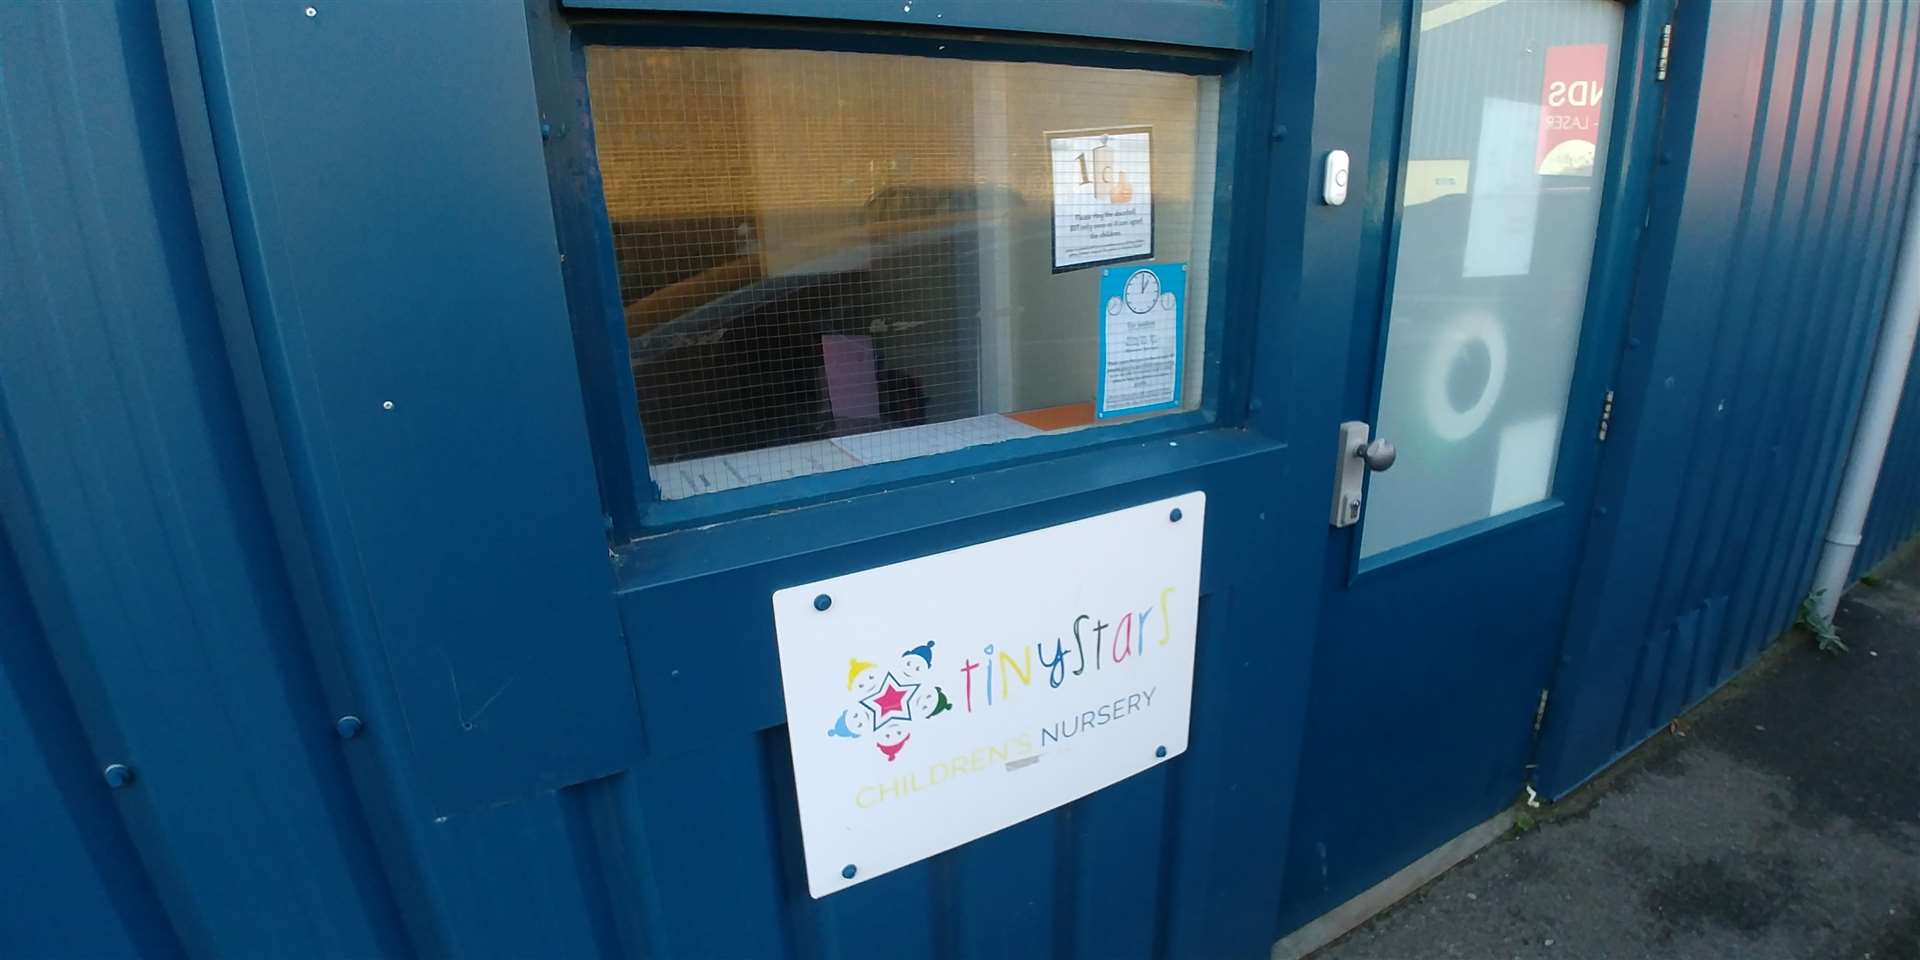 Tony Stars nursery is Simmonds Road has been rated inadequate by Ofsted. (6176751)